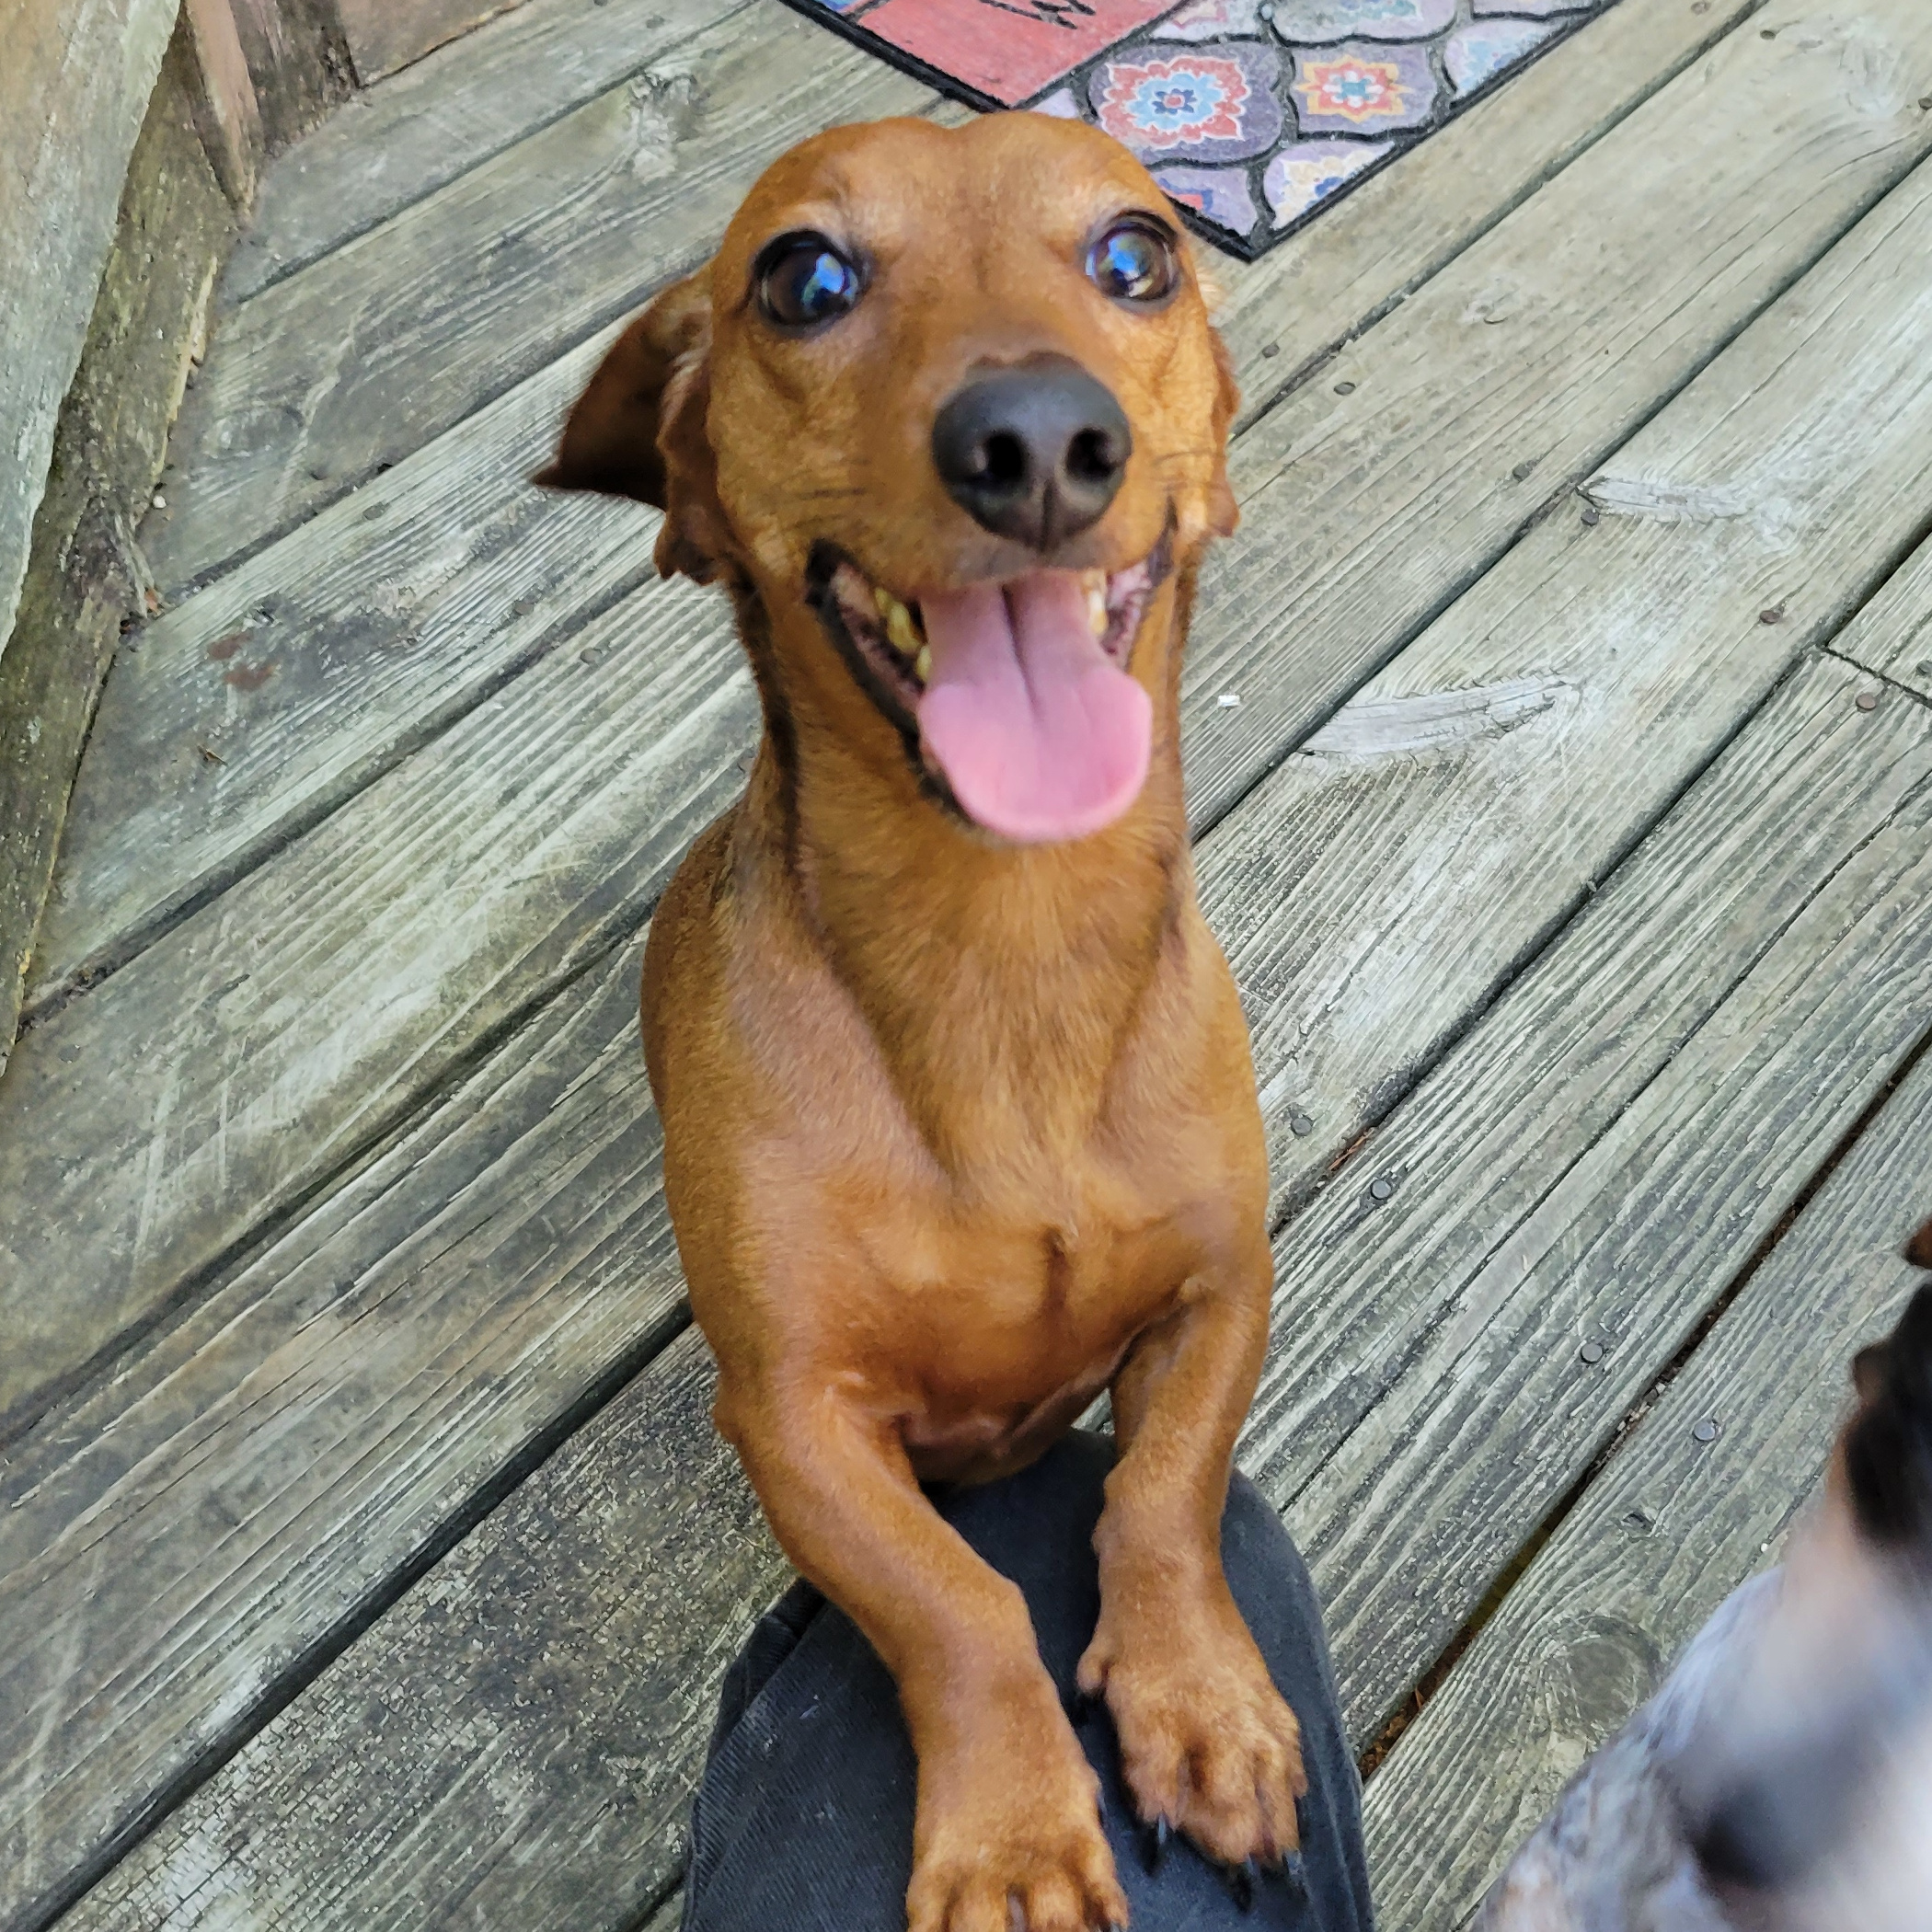 A very happy dachshund (Lincoln). His eyes are gleaming and his tongue is sticking out.